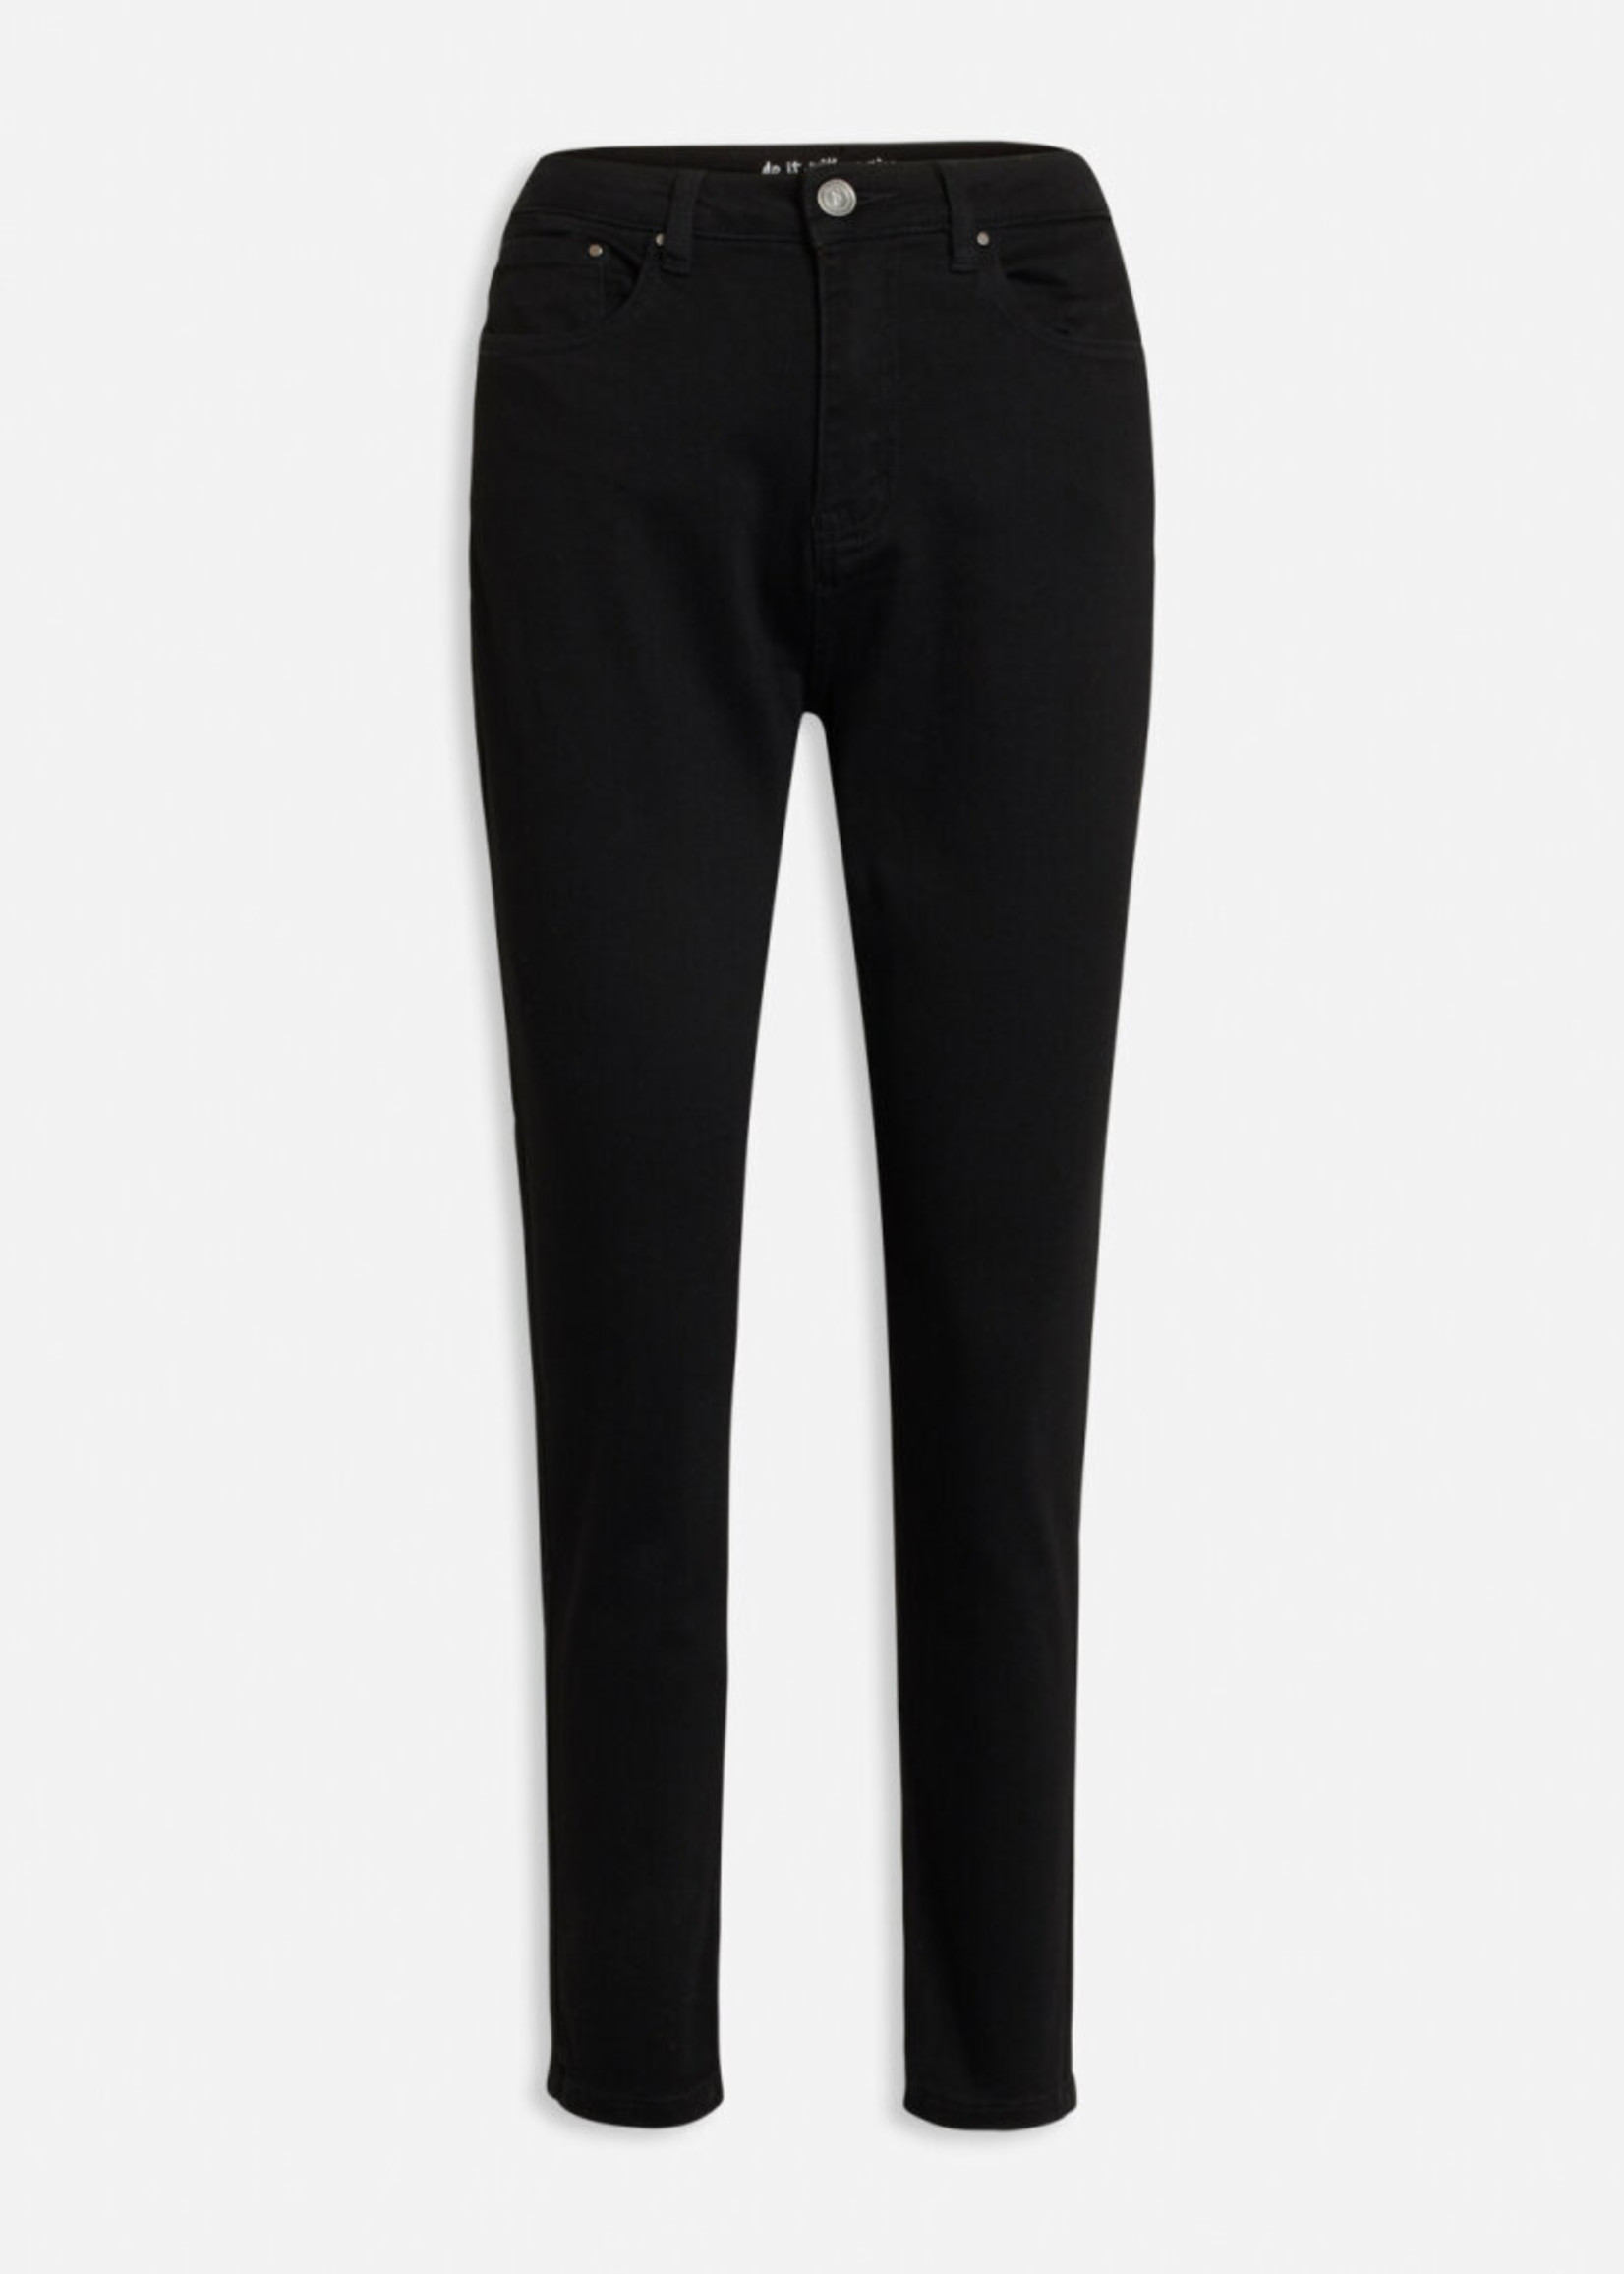 SISTERS POINT Faria jeans black